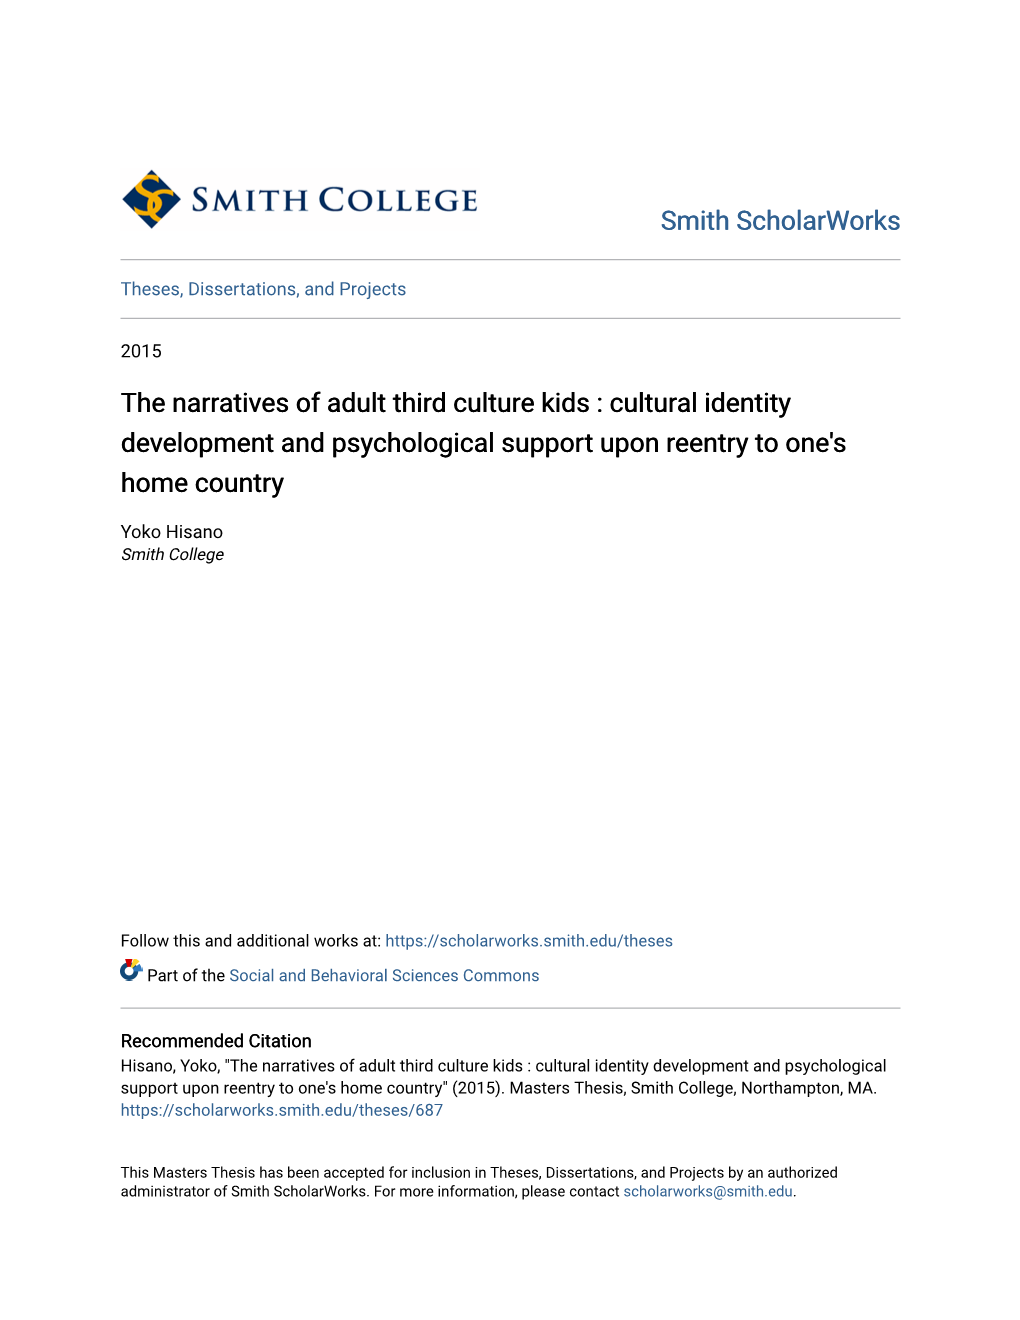 The Narratives of Adult Third Culture Kids : Cultural Identity Development and Psychological Support Upon Reentry to One's Home Country